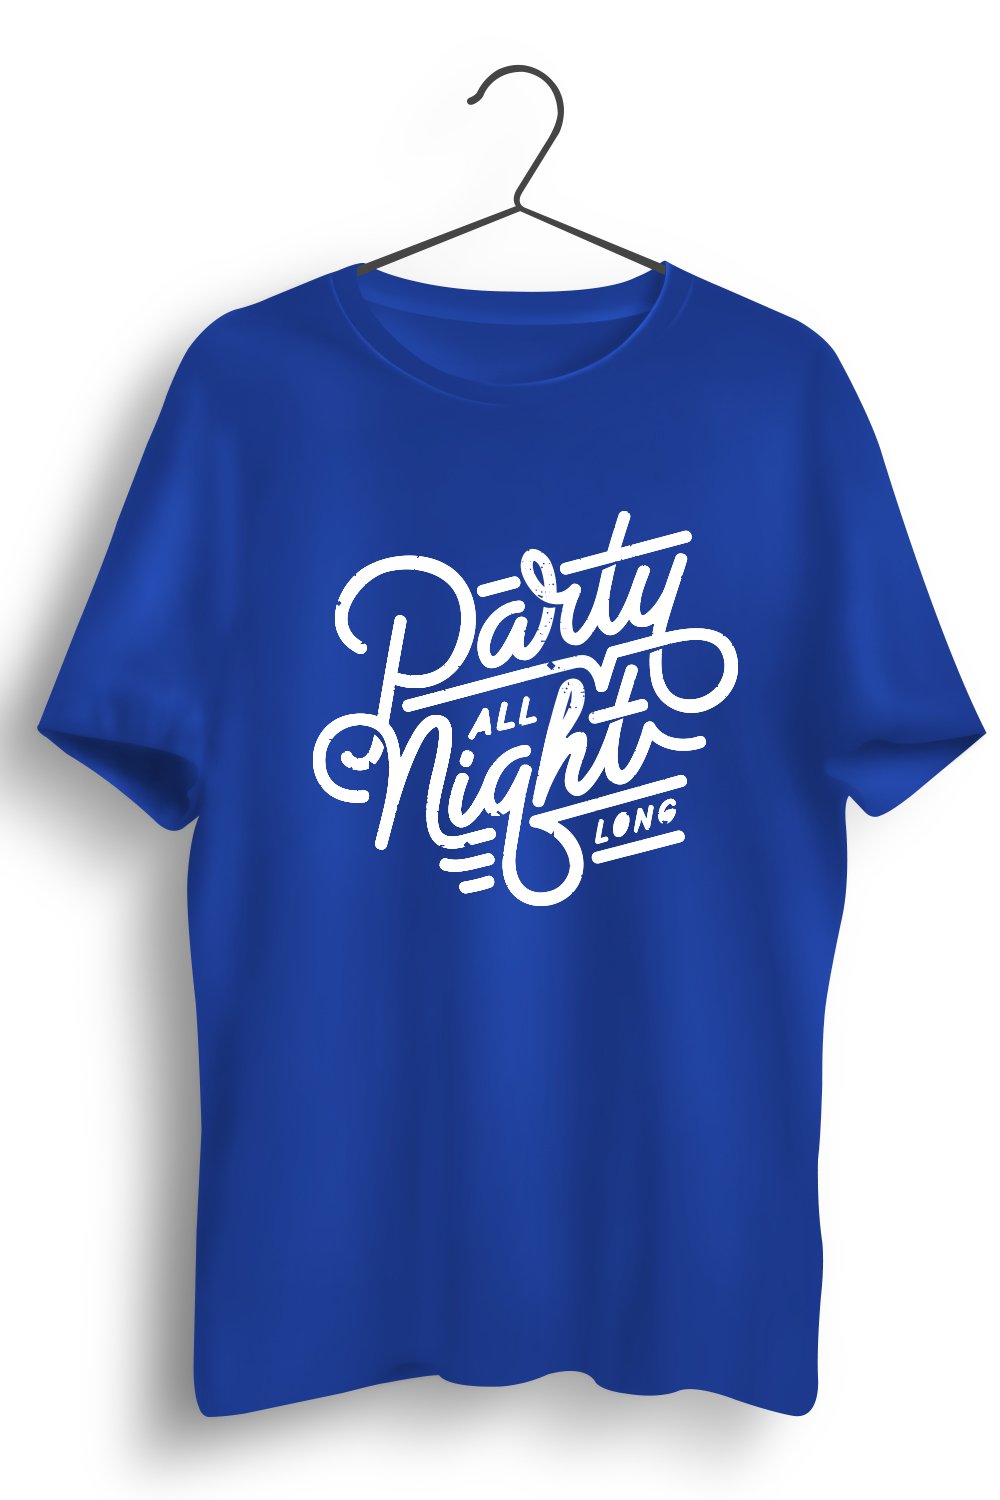 Party All Night Graphic Printed Blue Tshirt